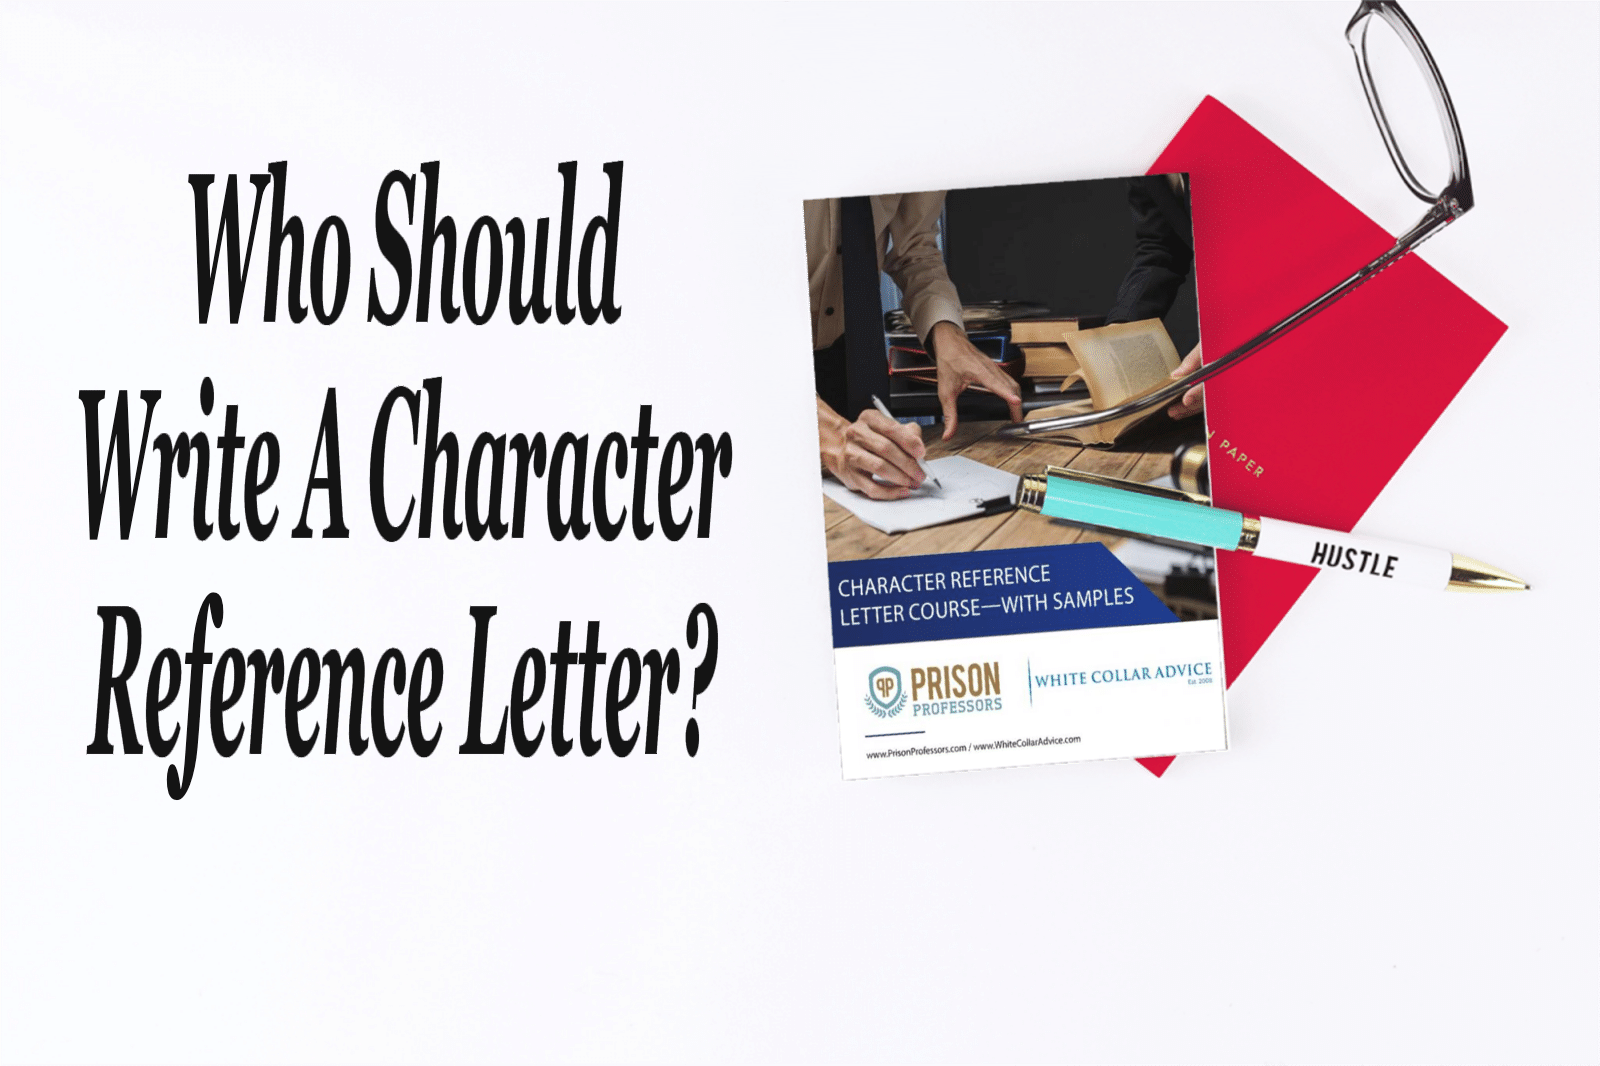 Who Should Write Character Reference Letters? - White Collar Advice